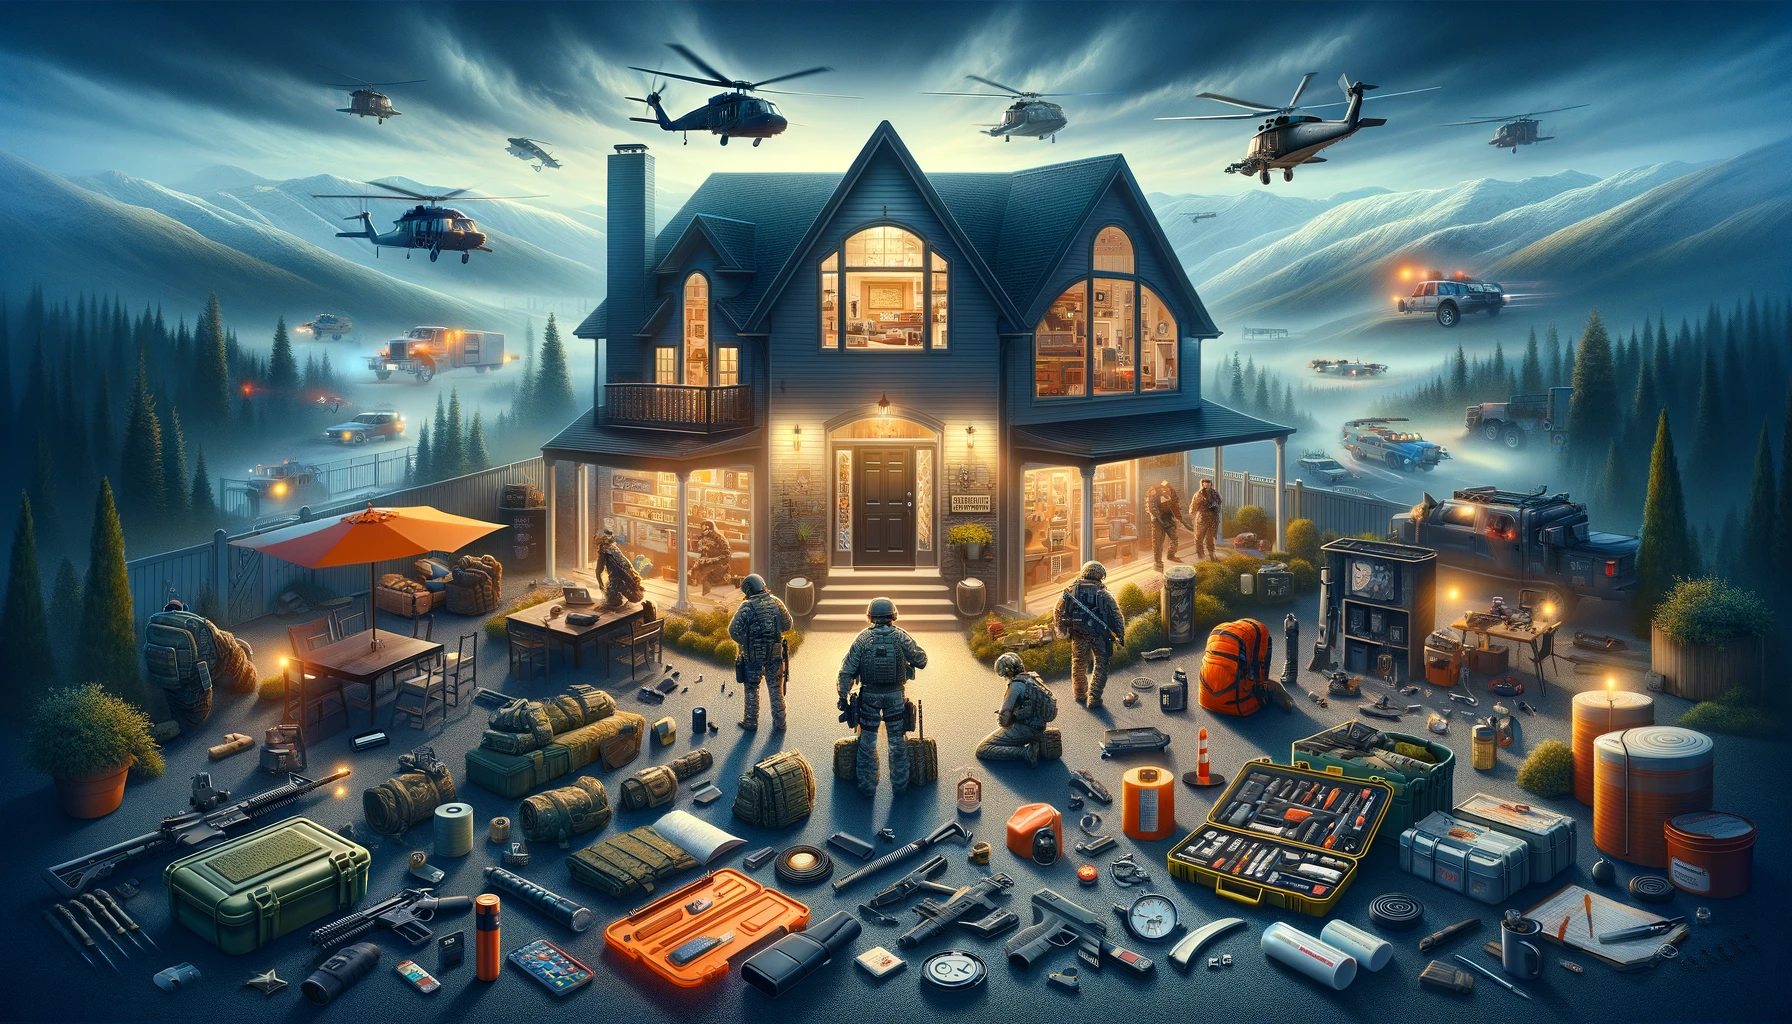 A detailed and vibrant scene showcasing a variety of home and personal defense tools and strategies, including security systems and fortified entry points, being utilized by individuals or families, highlighting the strategic importance of safety and security in emergency preparedness.